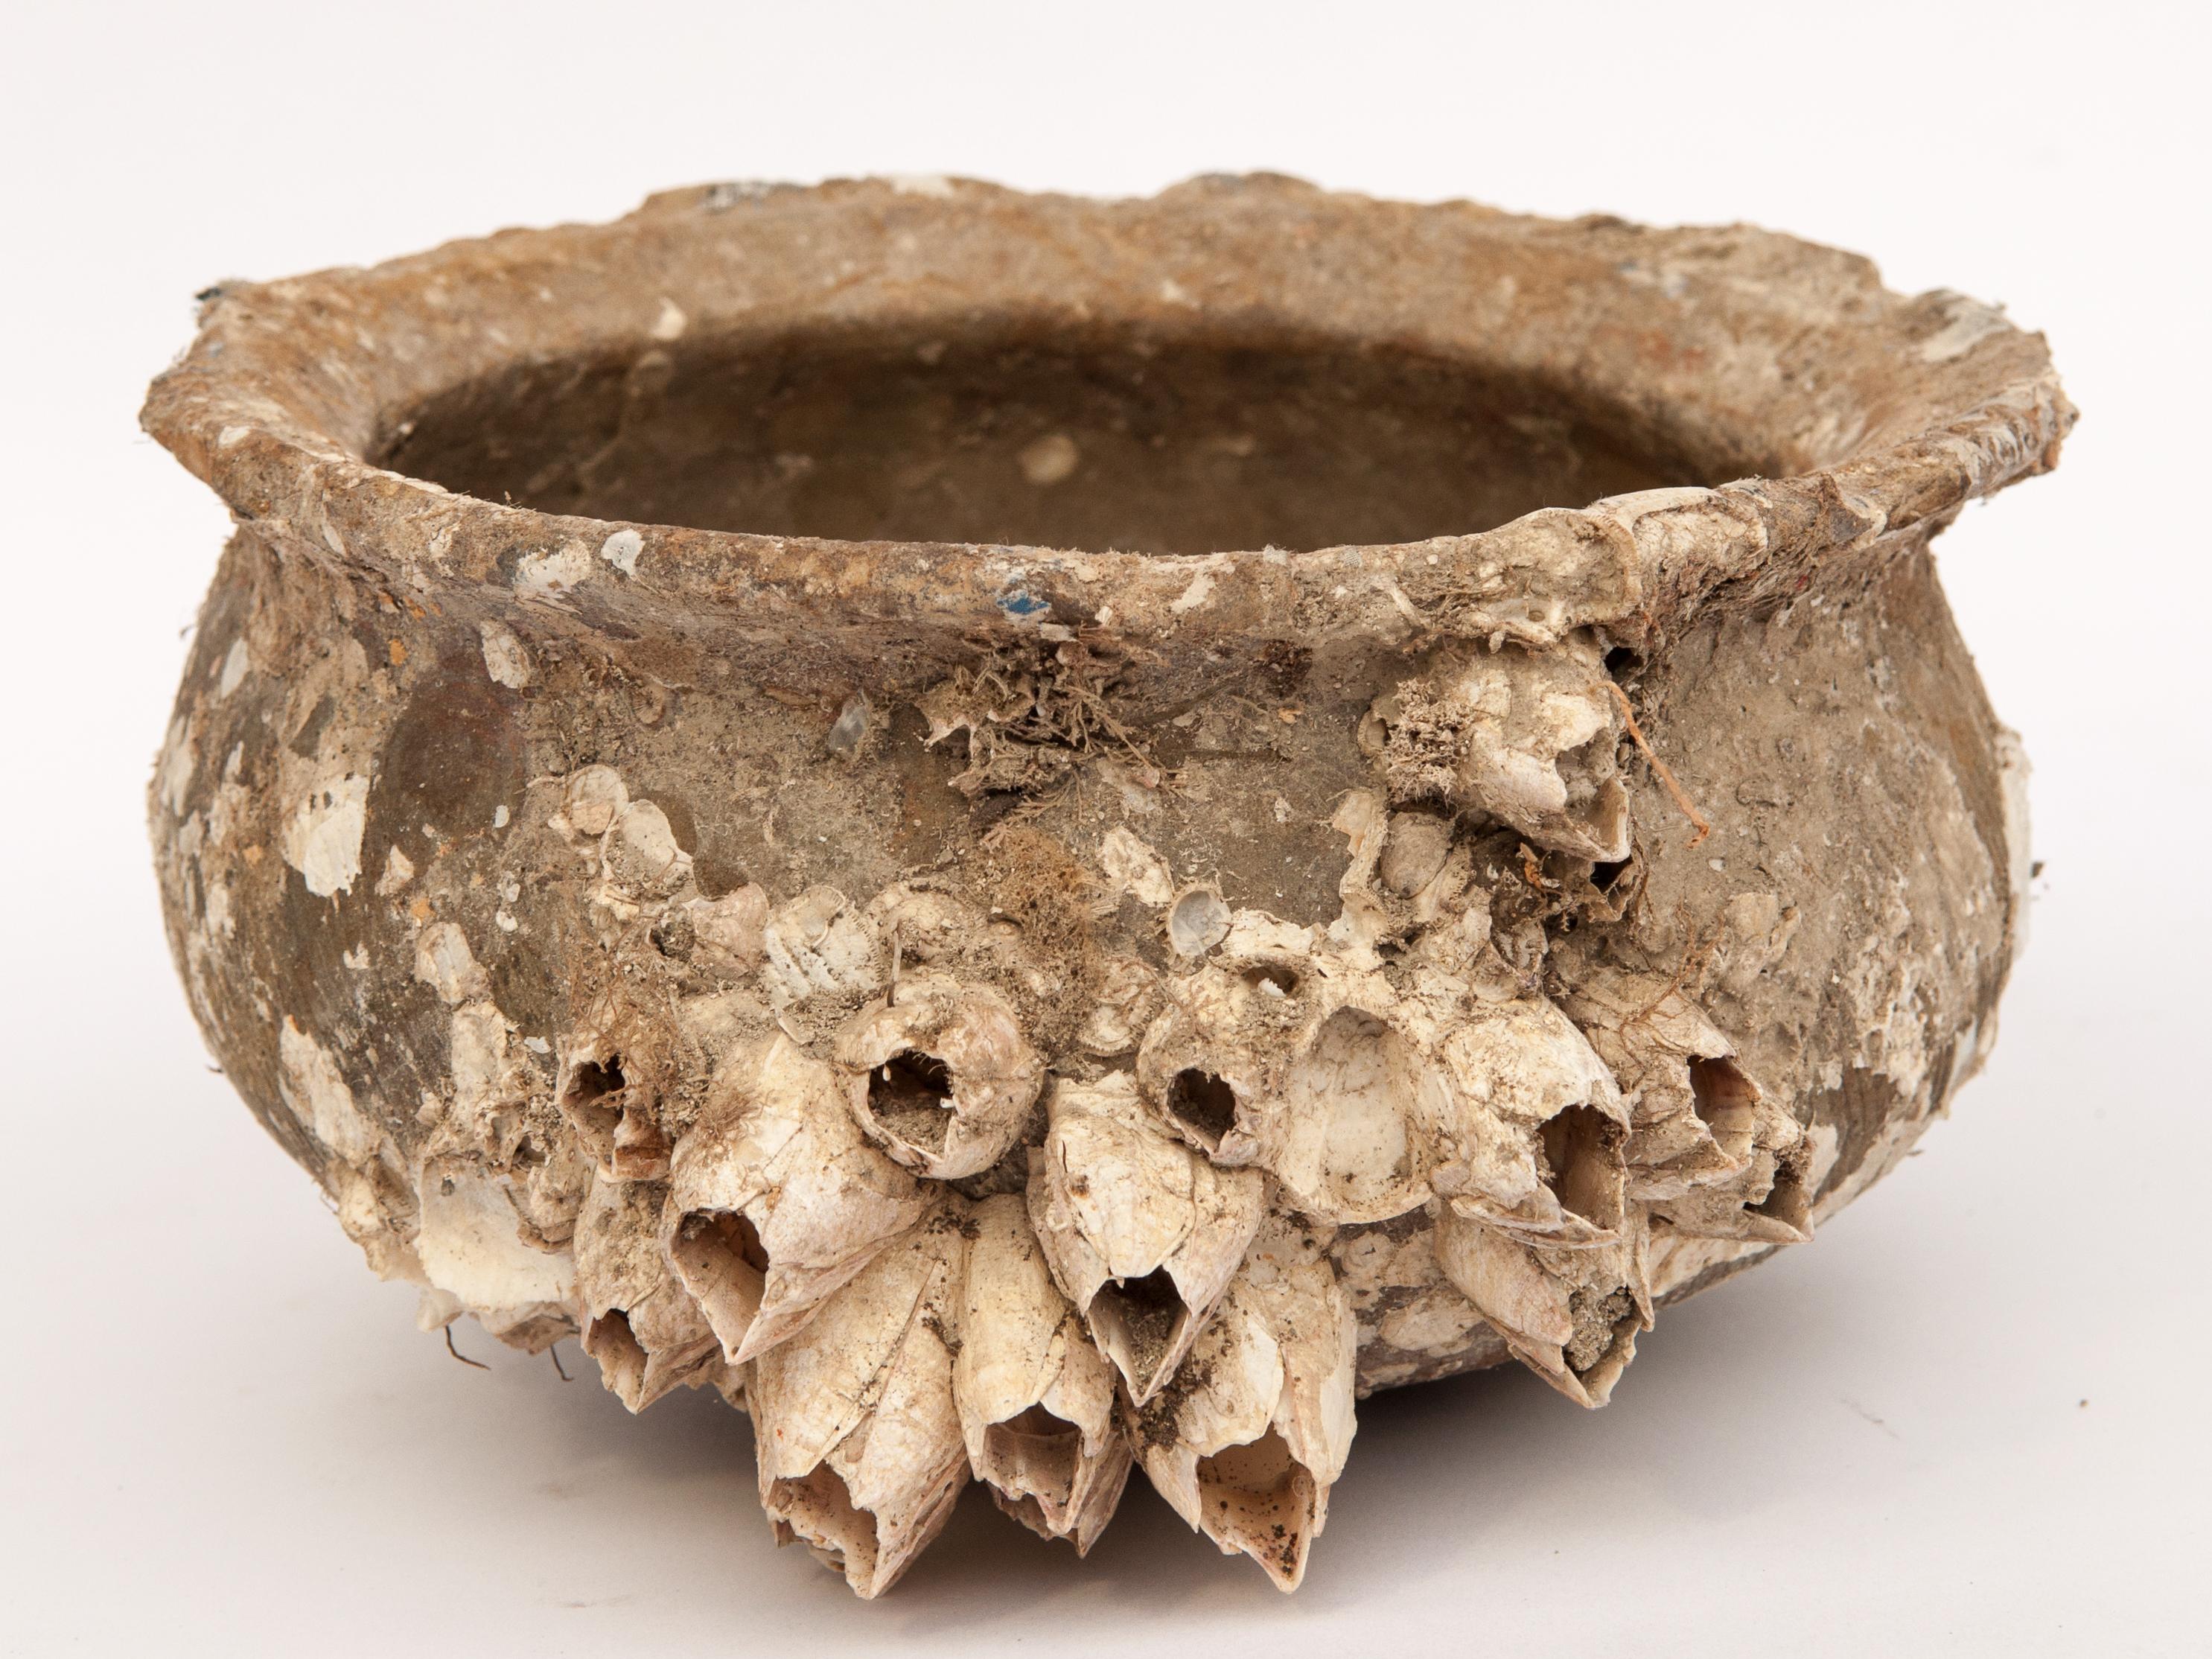 Hand-Crafted Song Dynasty Round Bottomed Bowl with Encrustations, 12th Century or Earlier